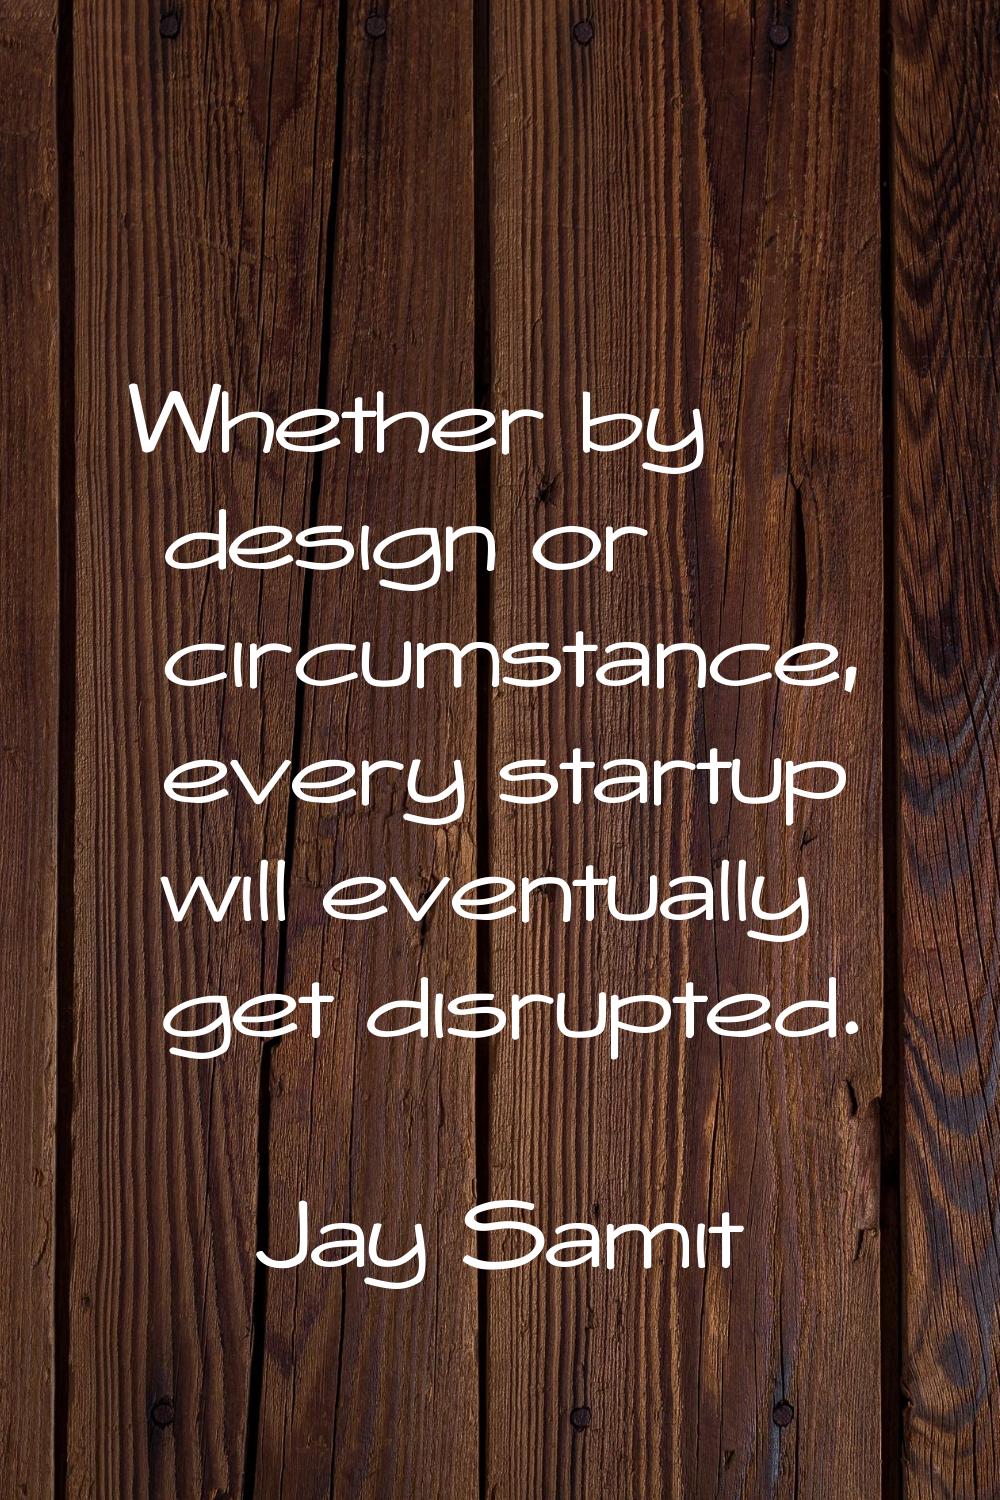 Whether by design or circumstance, every startup will eventually get disrupted.